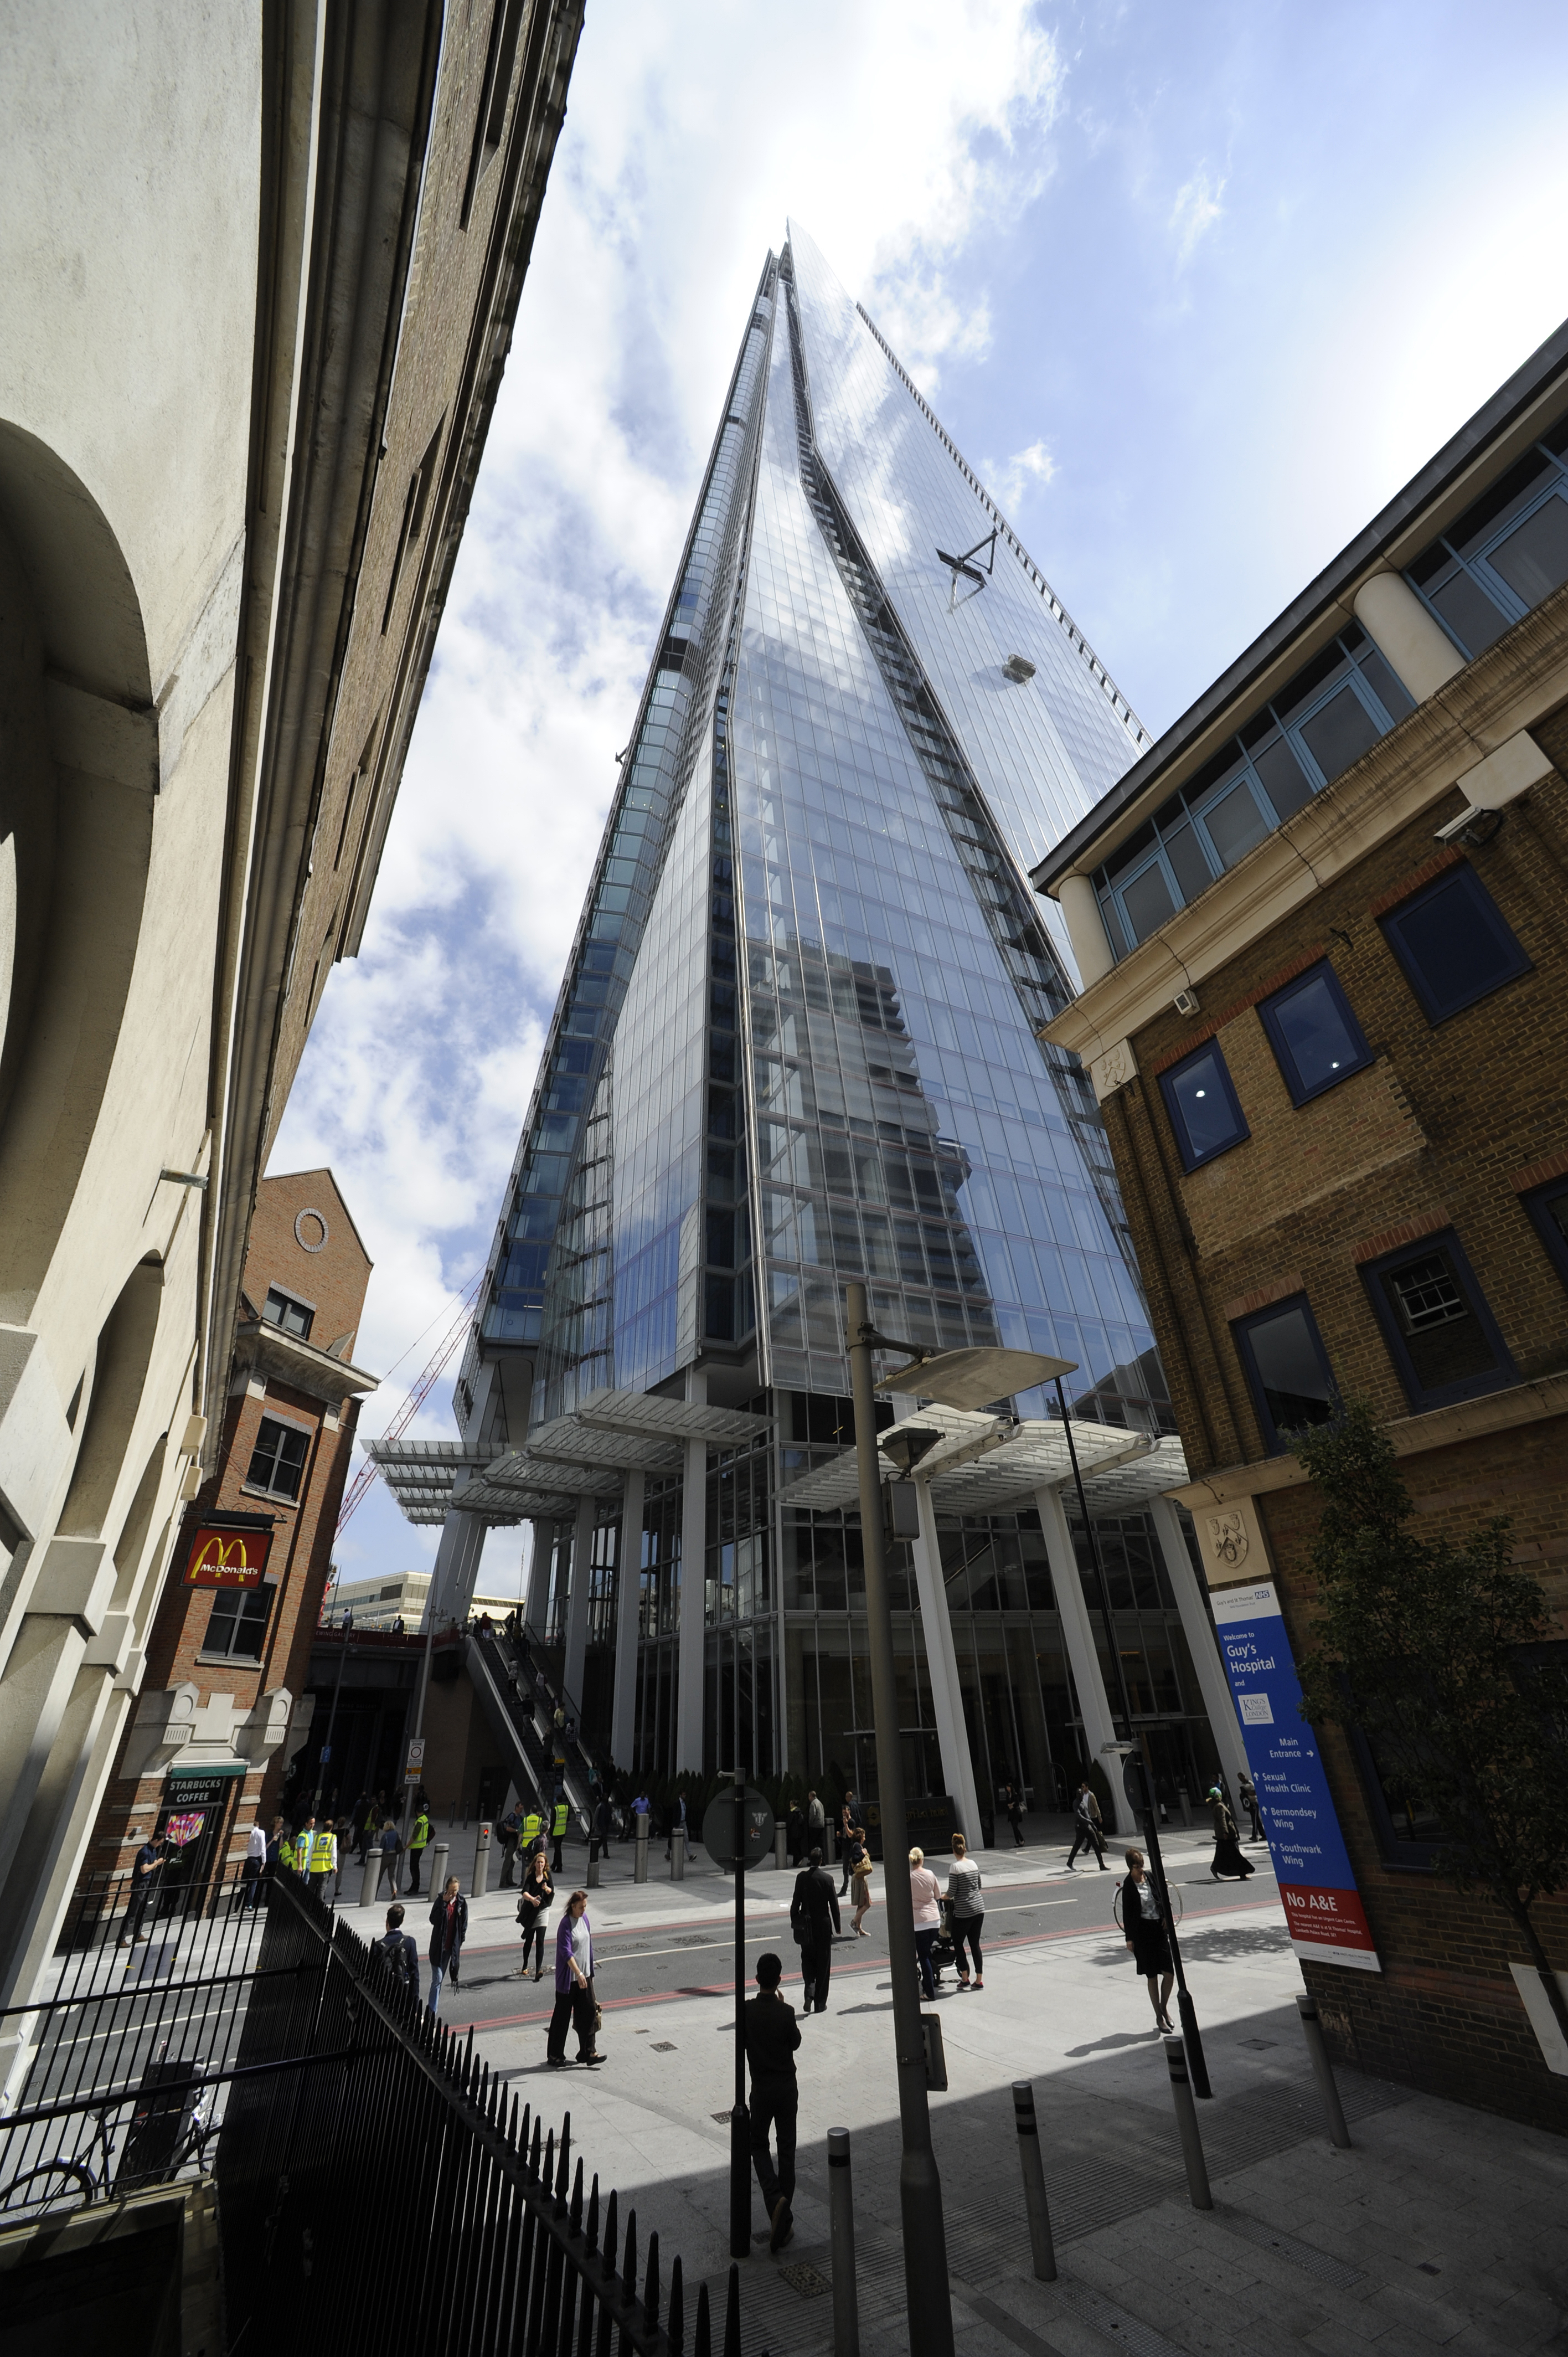 The Shard Designed by Renzo Piano